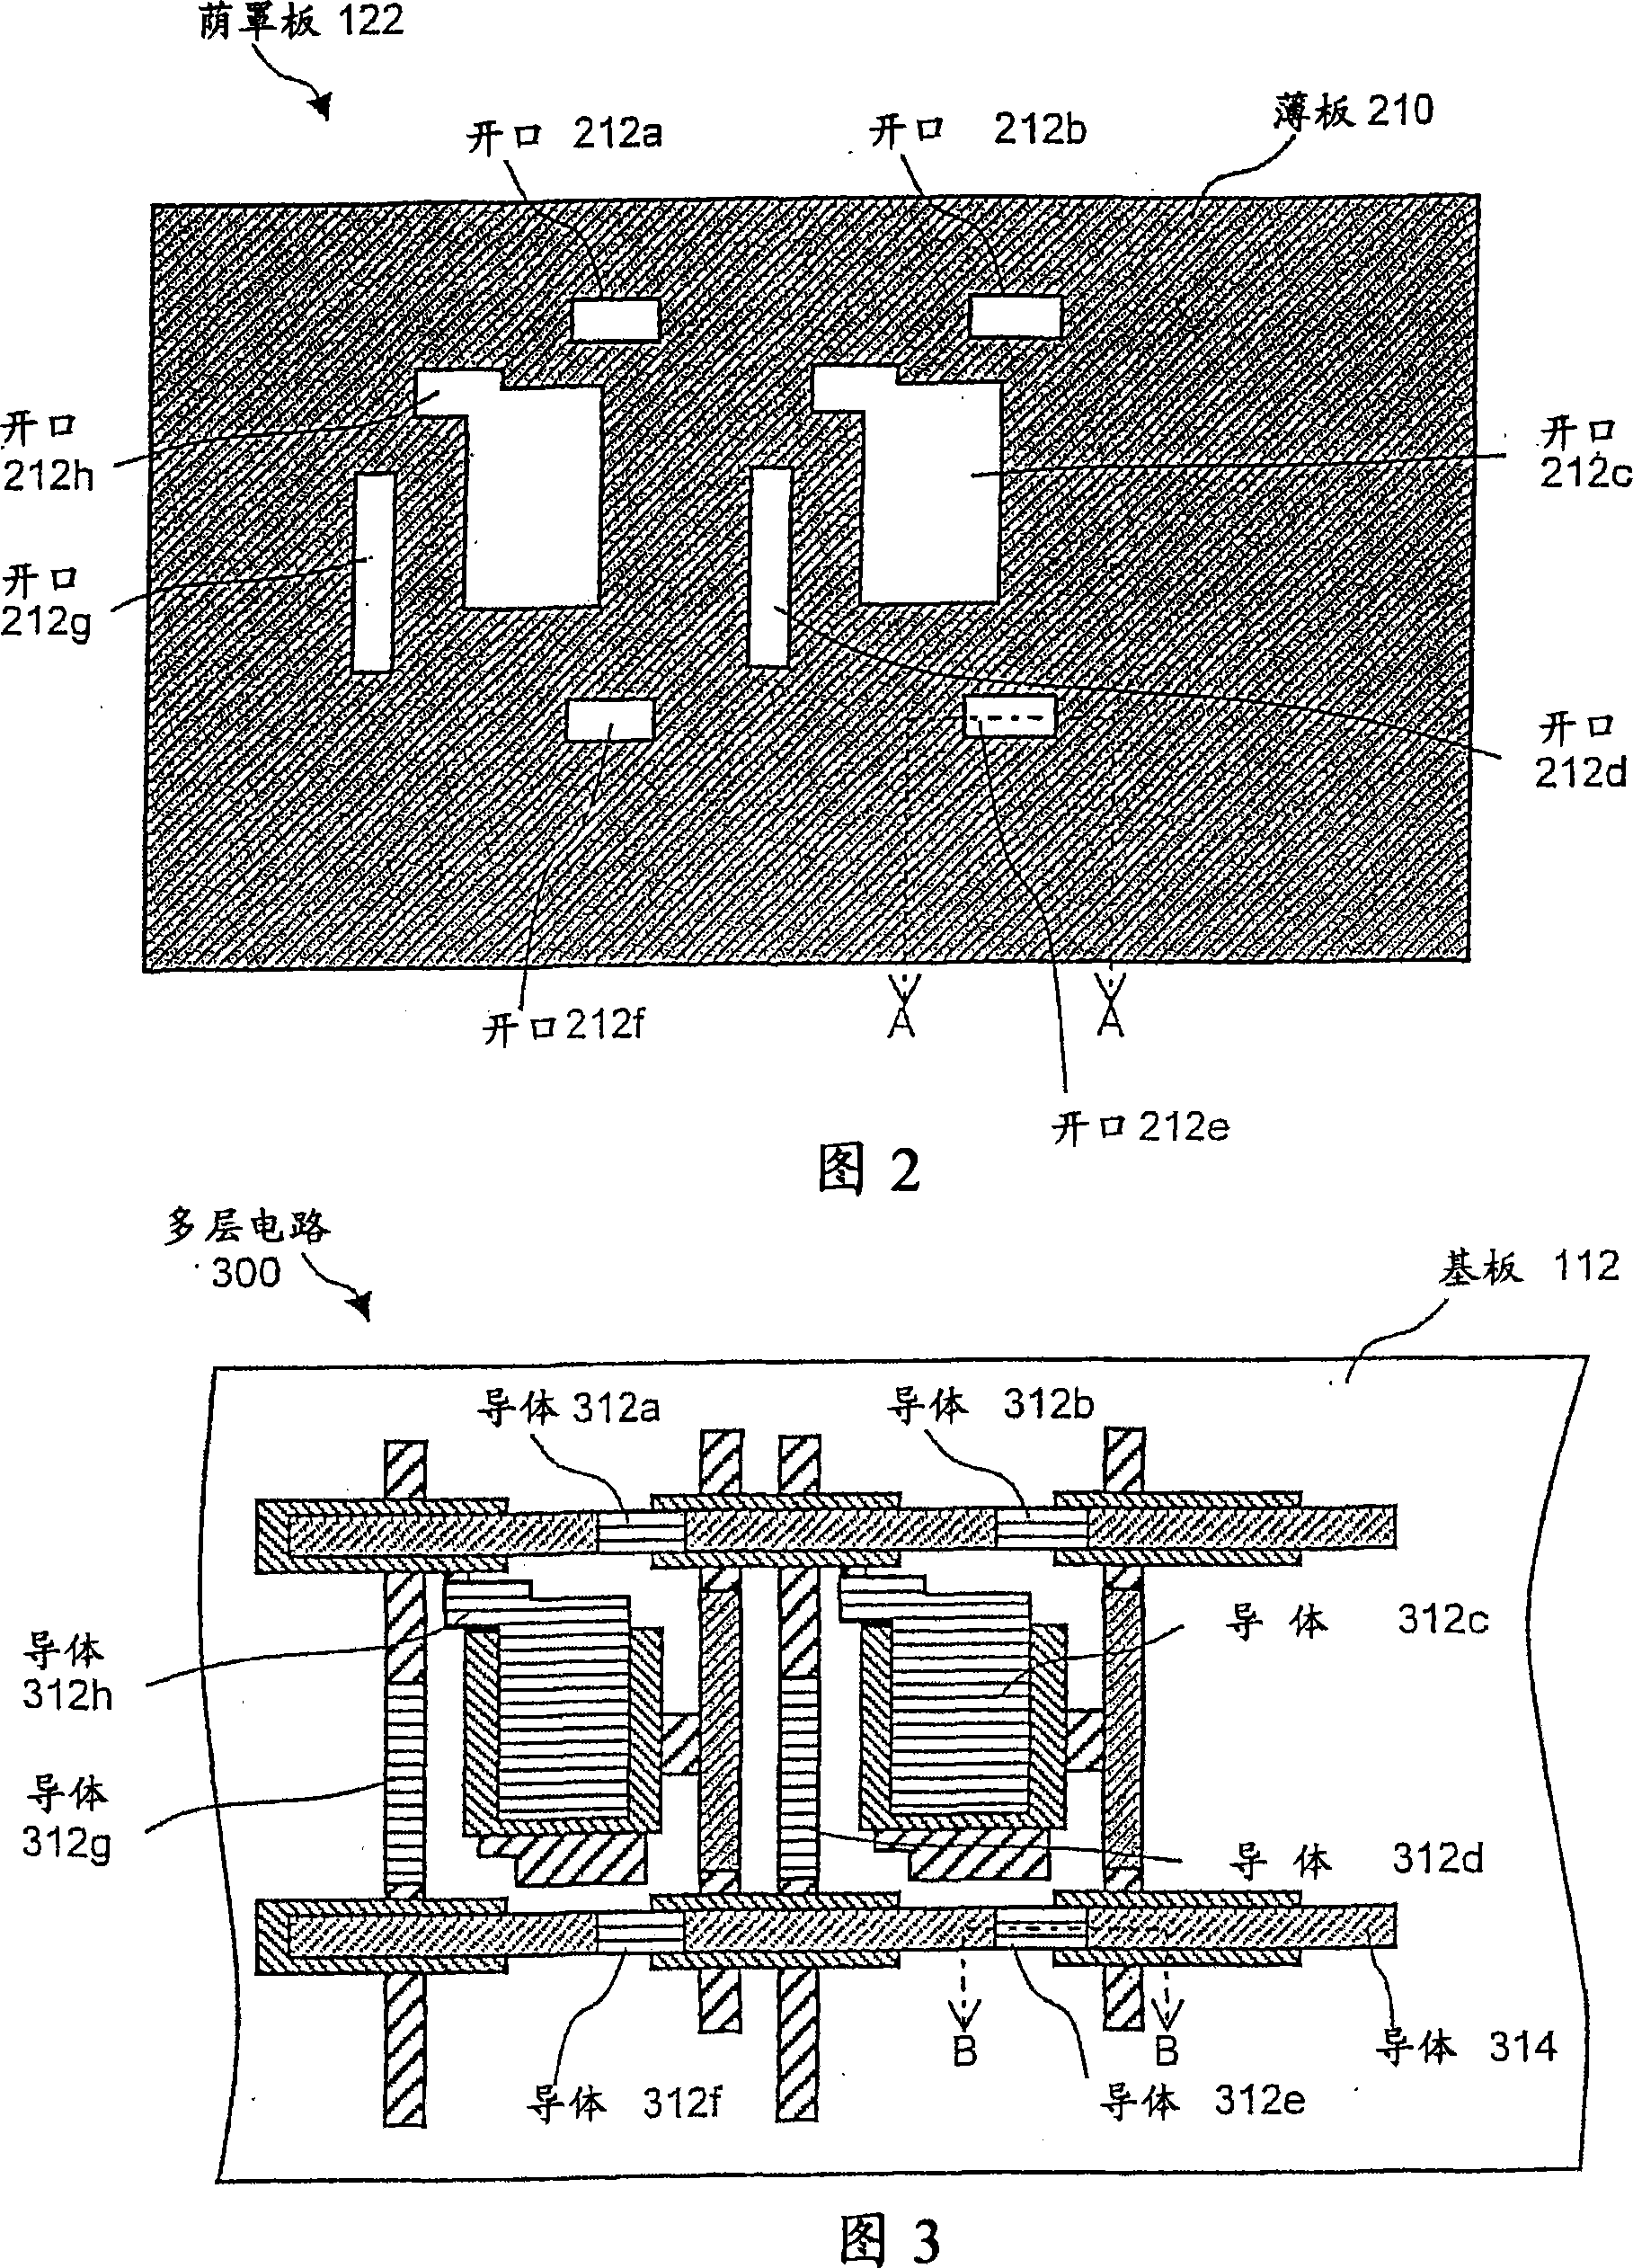 System for and method of ensuring accurate shadow mask-to-substrate registration in a deposition process